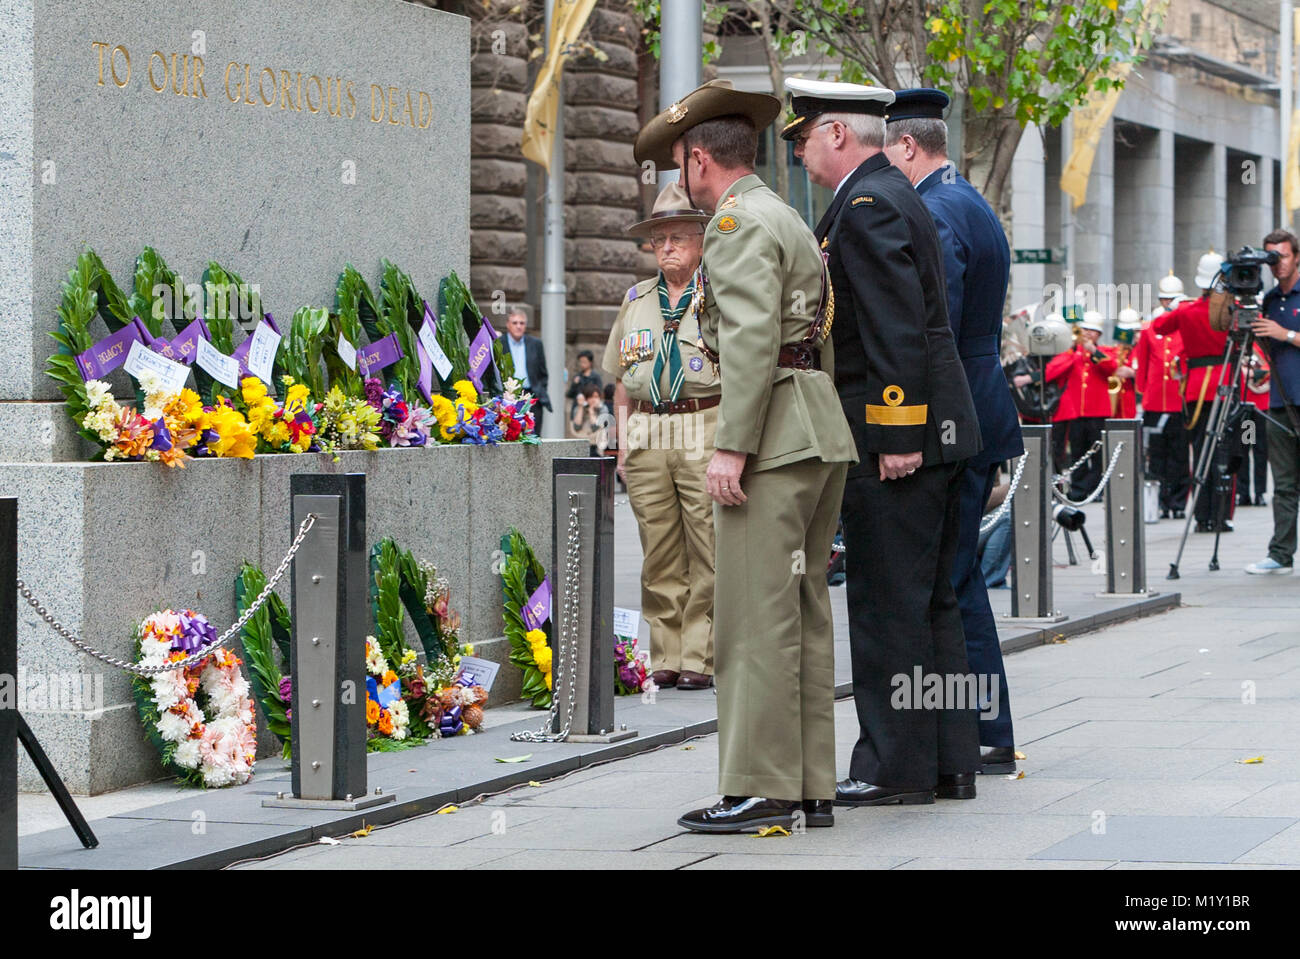 Legacy Week is launched at Martin Place in Sydney Australia for 2006. The popular annual event is well-known throughout Australia for the badge sellers who collect funds from the public to assist Australia's returned services staff and their relatives. Pictured: senior members of the ADF (Australian Defence Force) lay wreaths at The Cenotaph in Martin Place, Sydney. Stock Photo